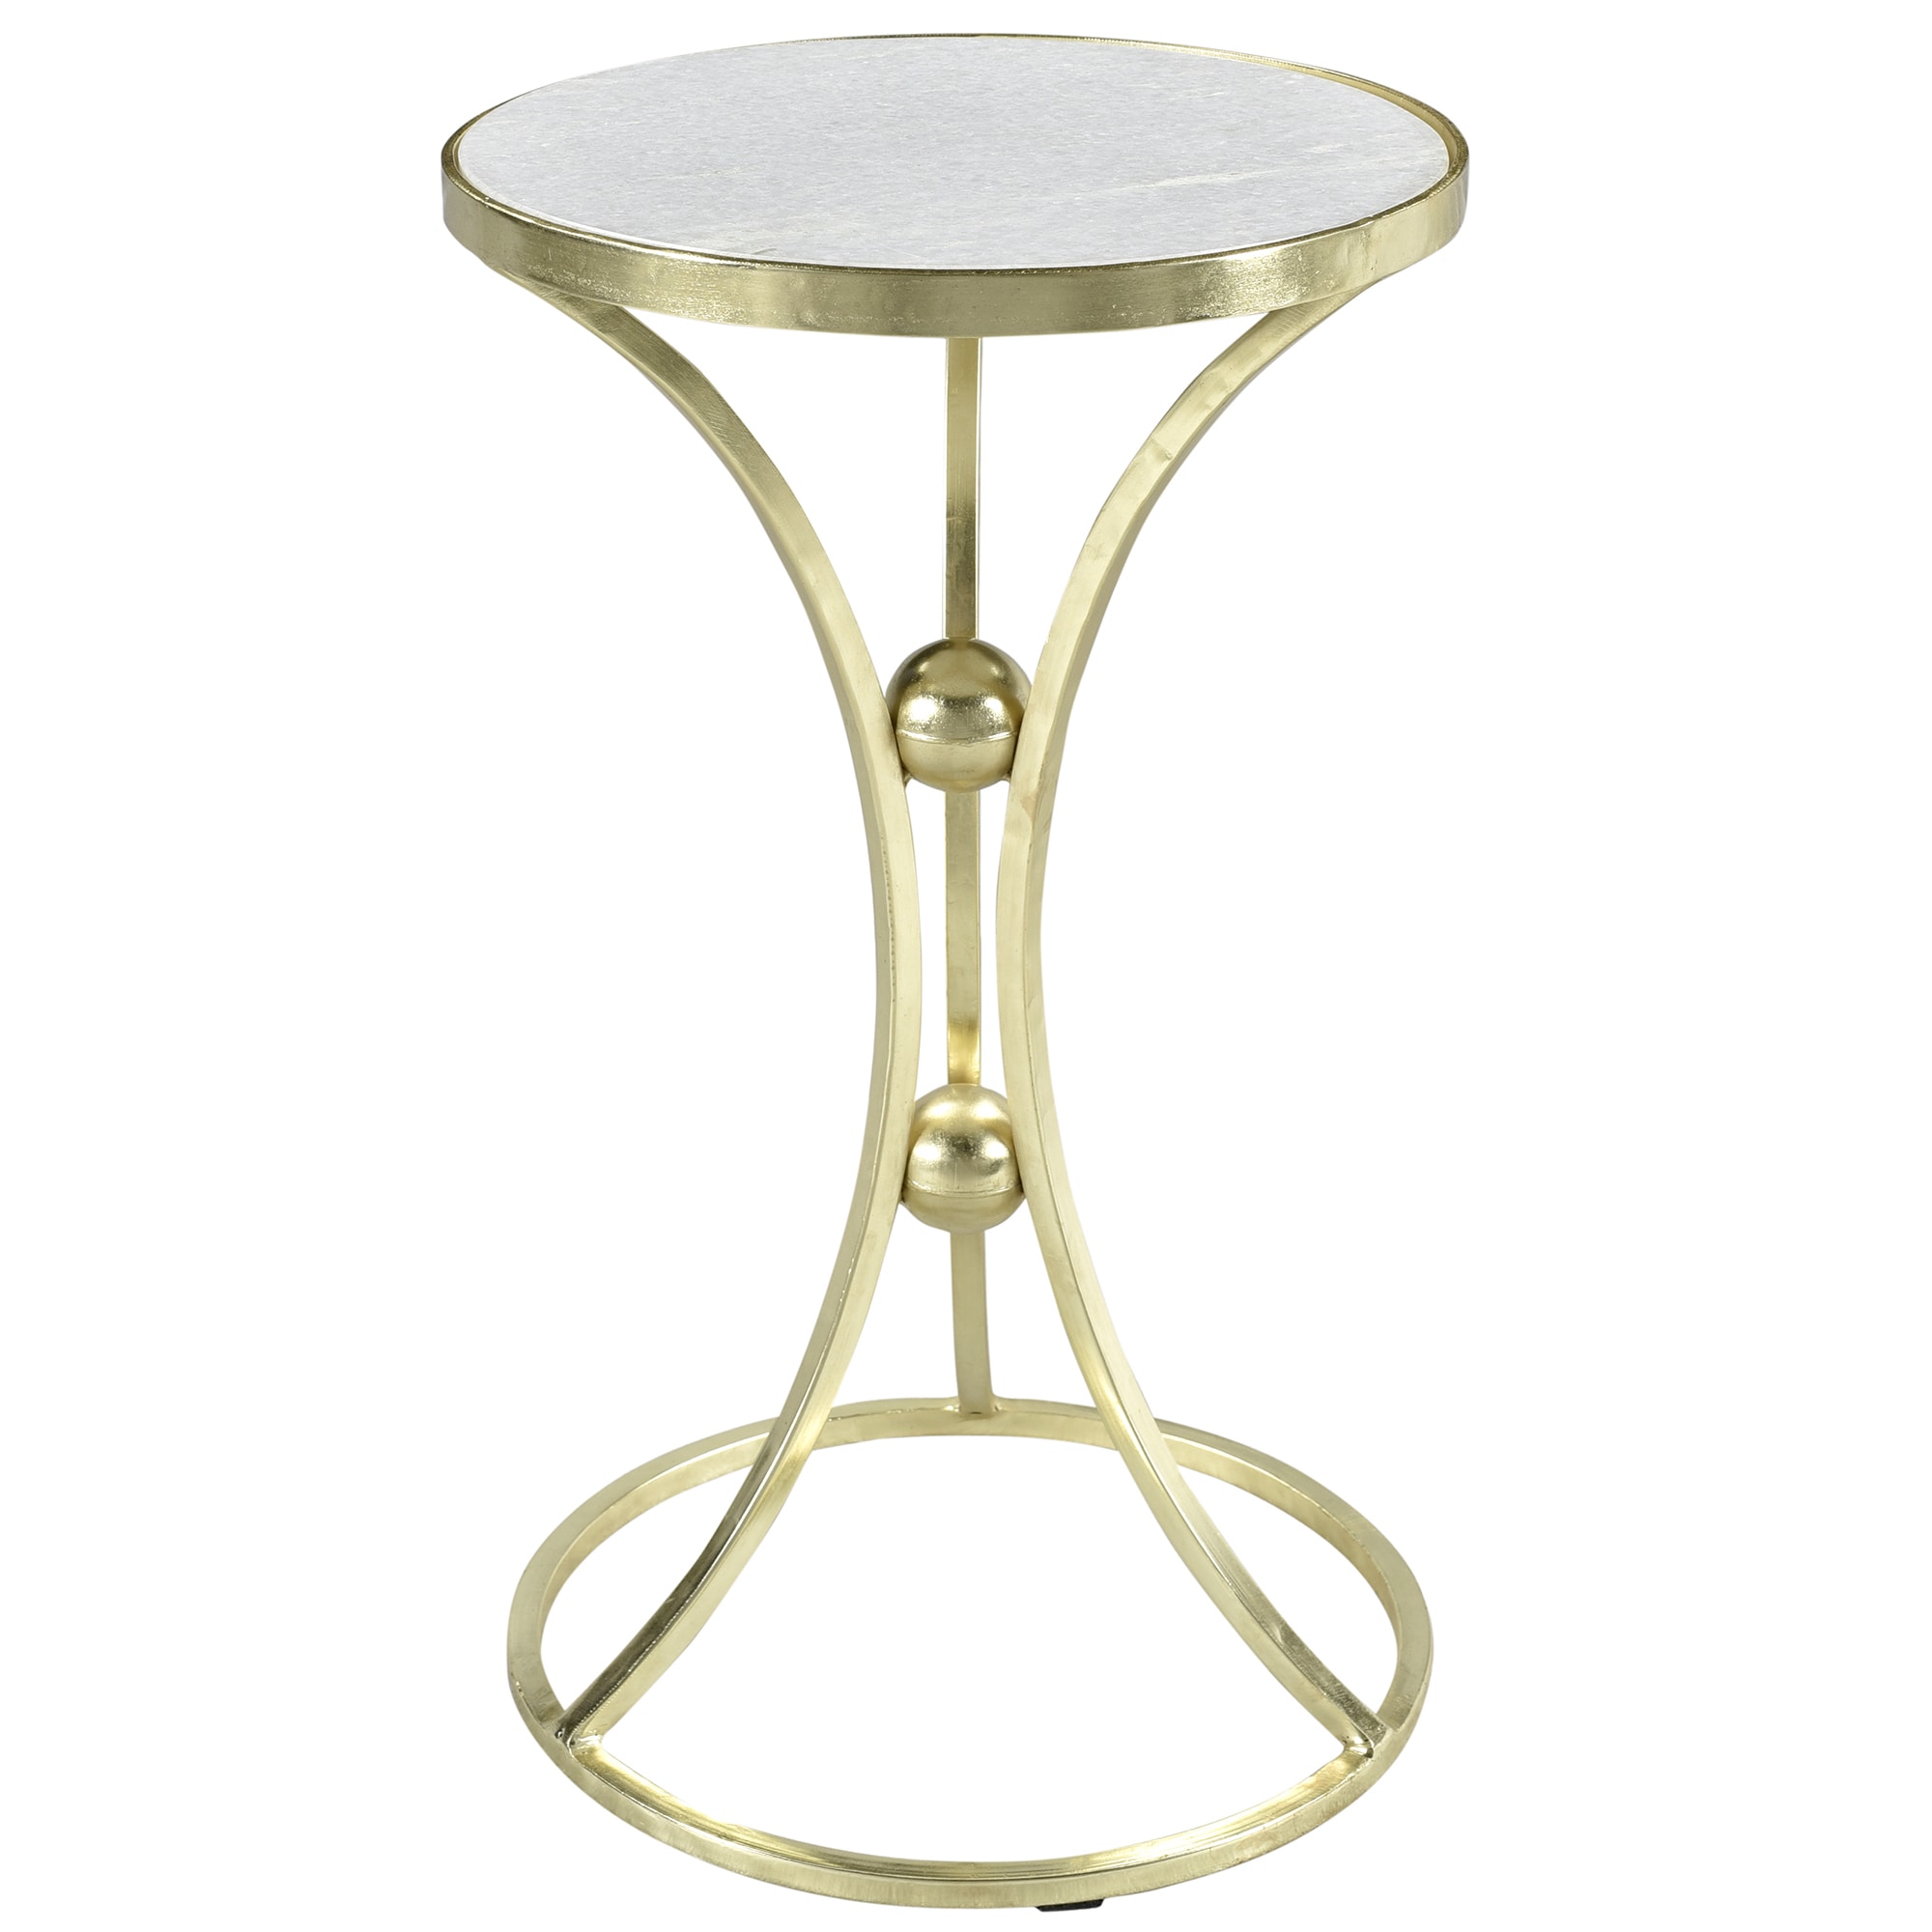 aura marble wrought iron accent table free shipping today metal outdoor company contemporary wood end tables grey top vinyl placemats pink chandelier lamp white garden furniture